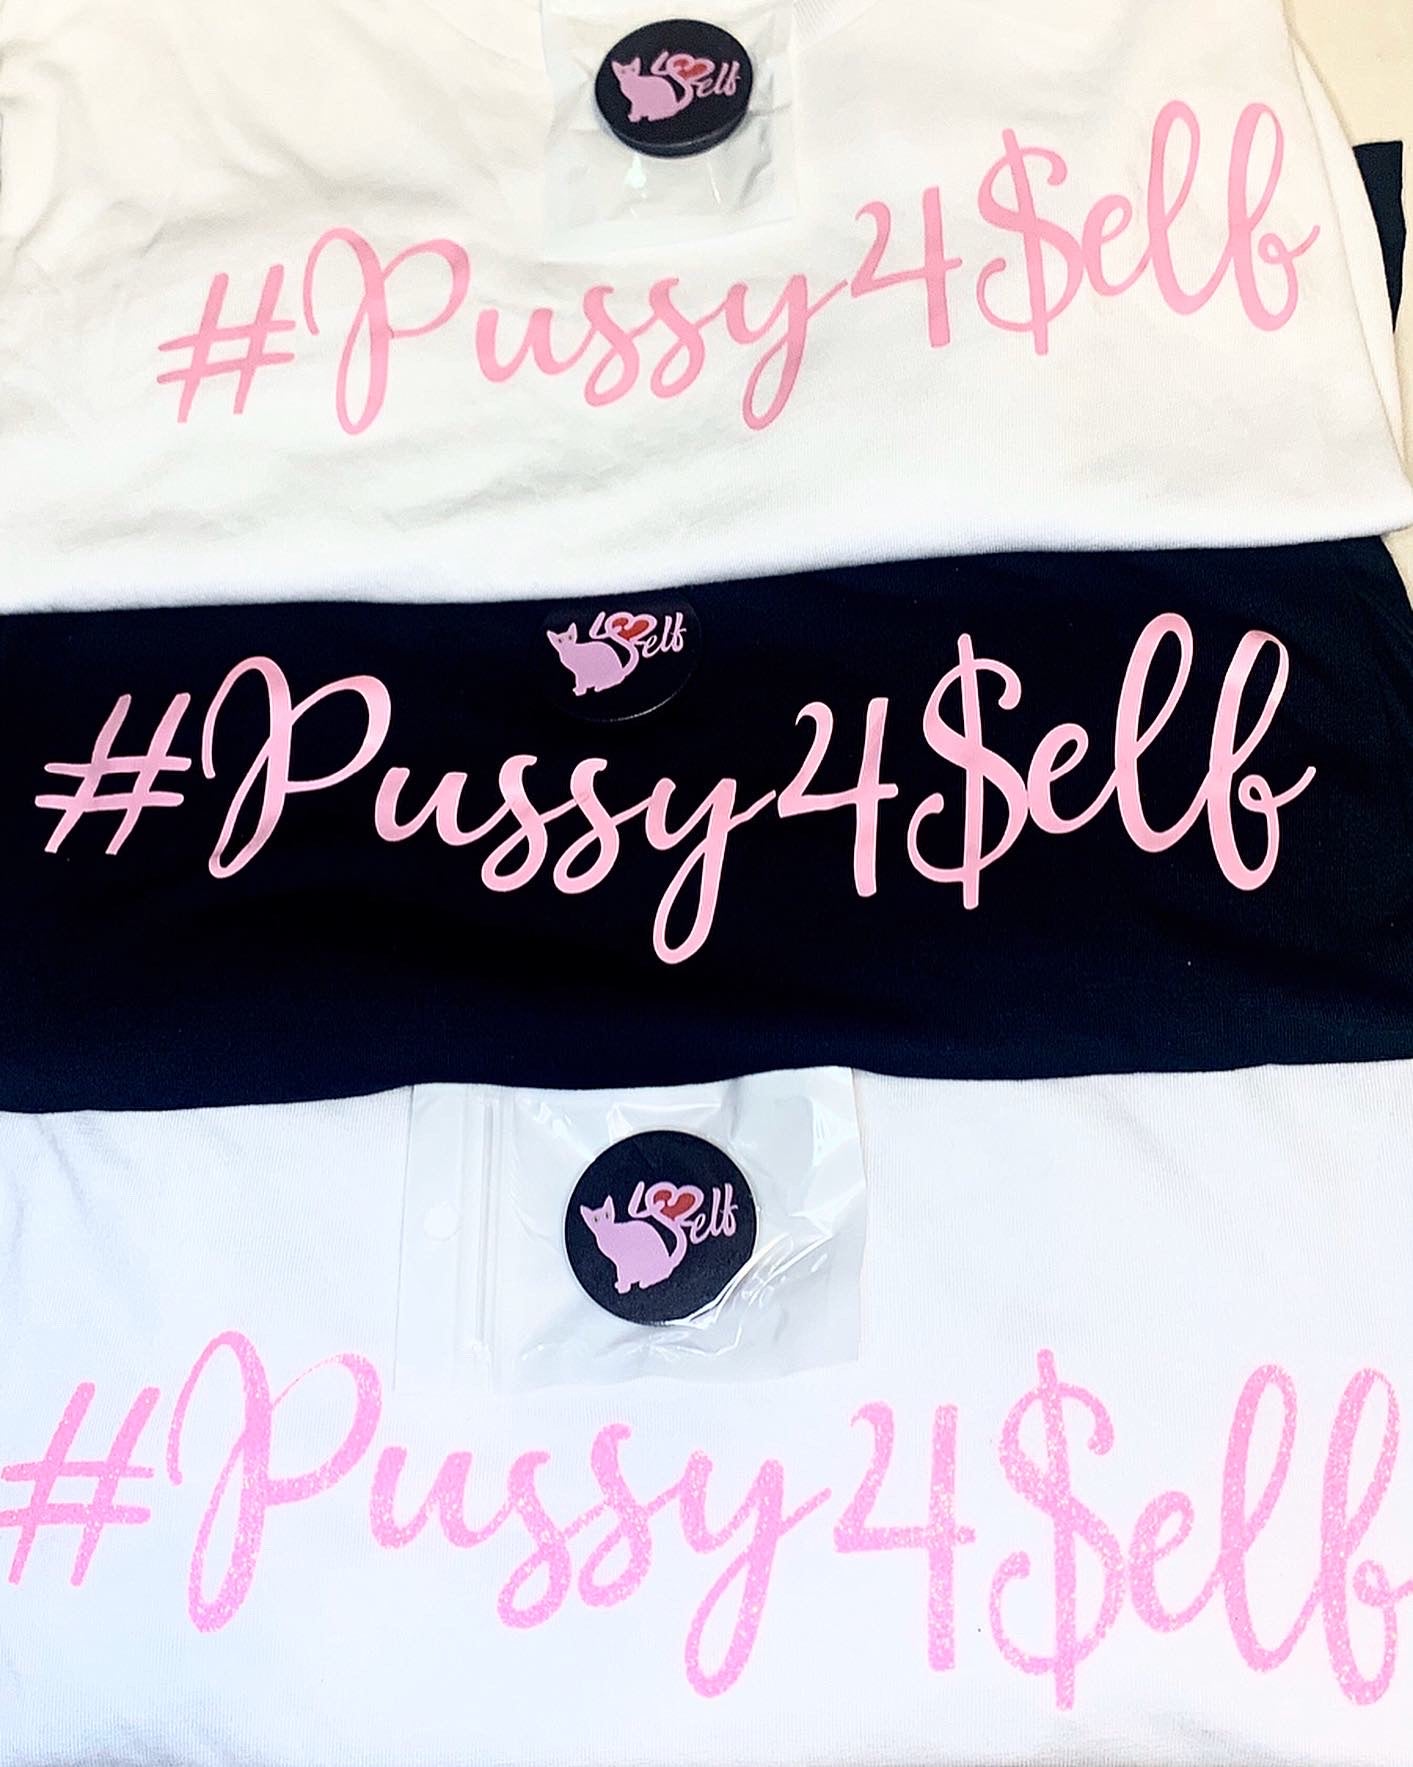  #pussy4self crop top tee white, black with pink imprint